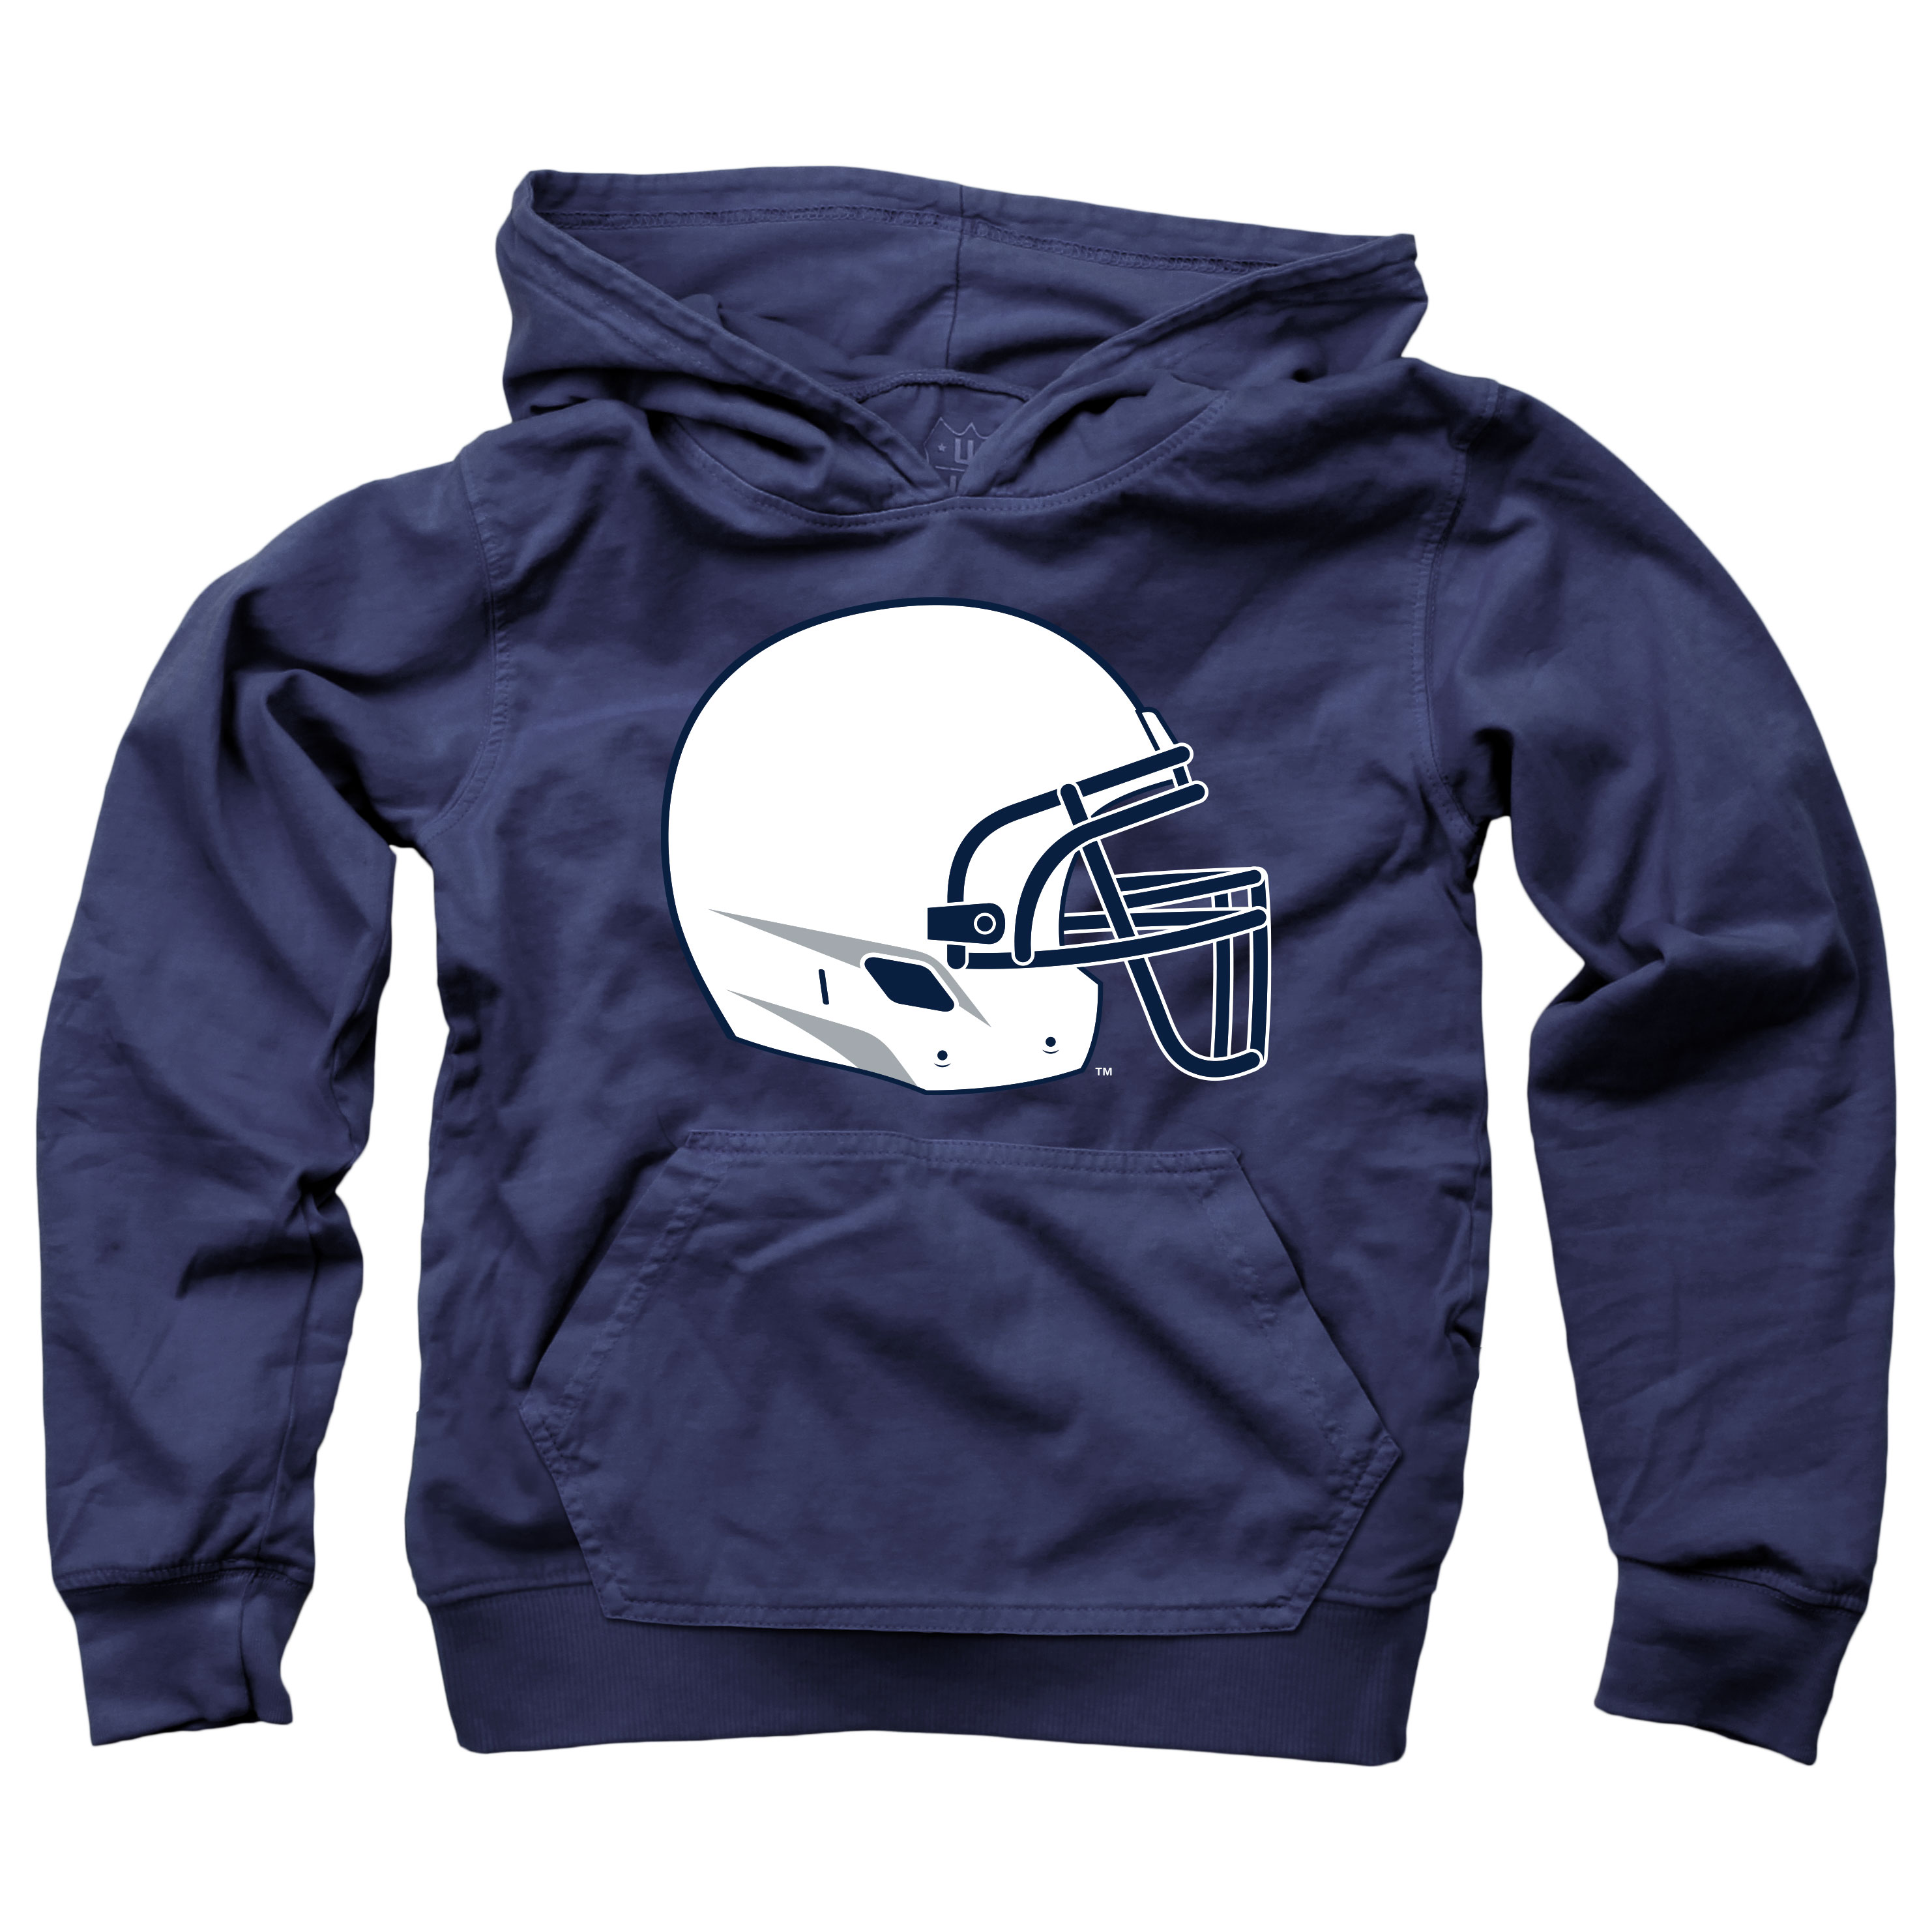 Wes And Willy Penn State Nittany Lions Youth Boys Helmet Logo Pullover Hoodie